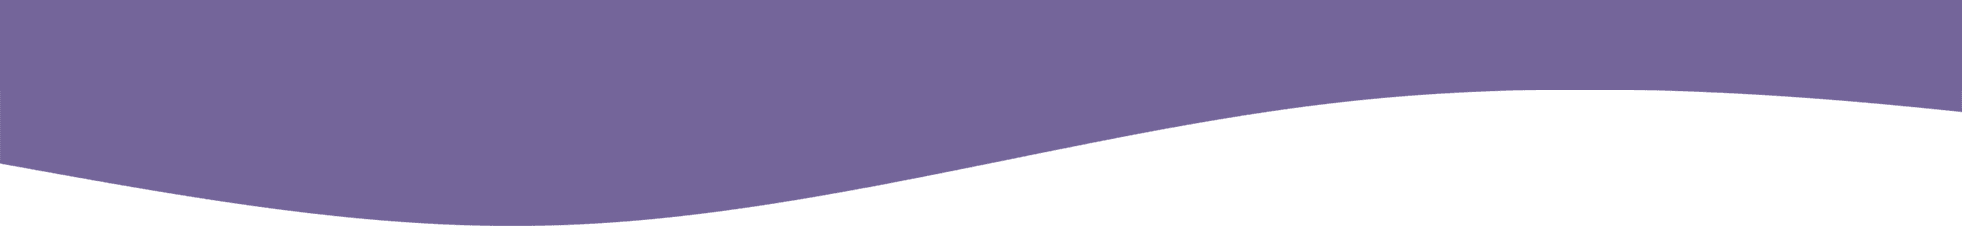 A purple and green background with a triangle